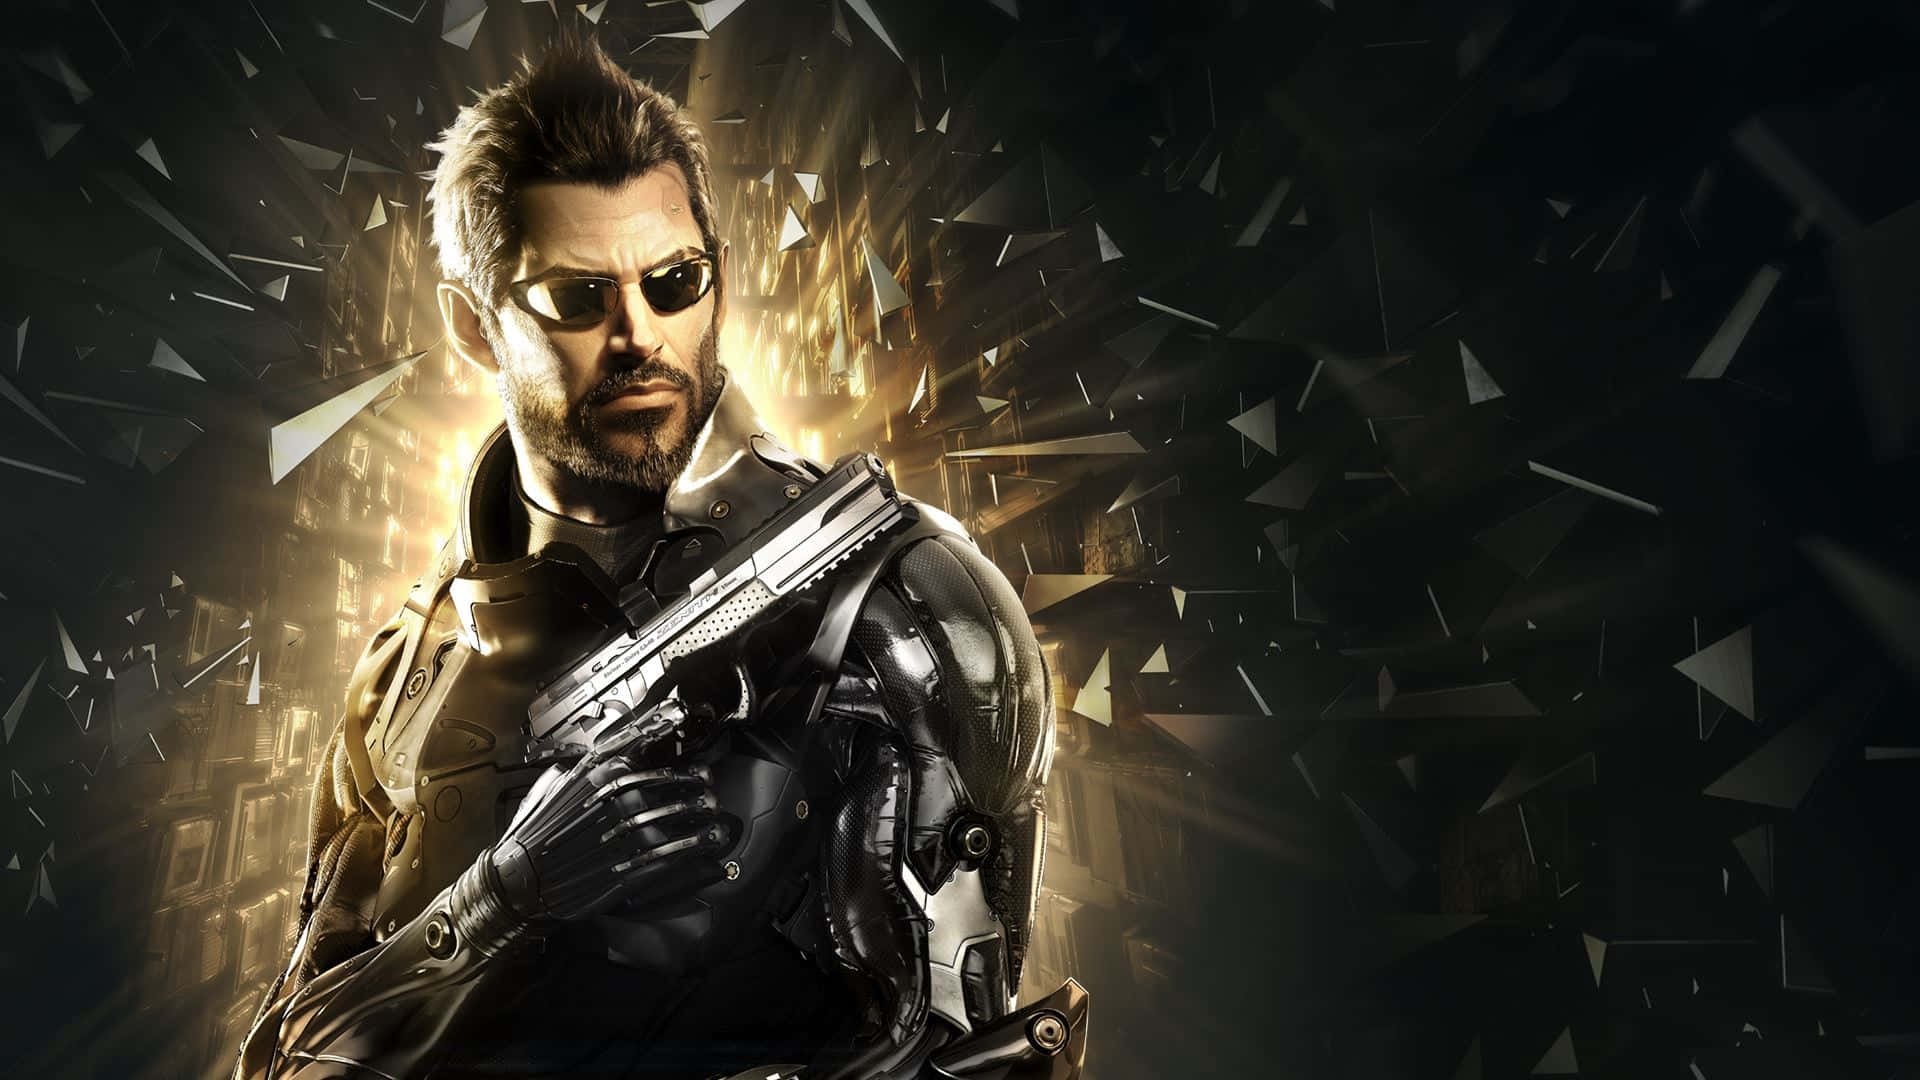 Mankind Divided - The Fate Of Humanity Hangs In The Balance